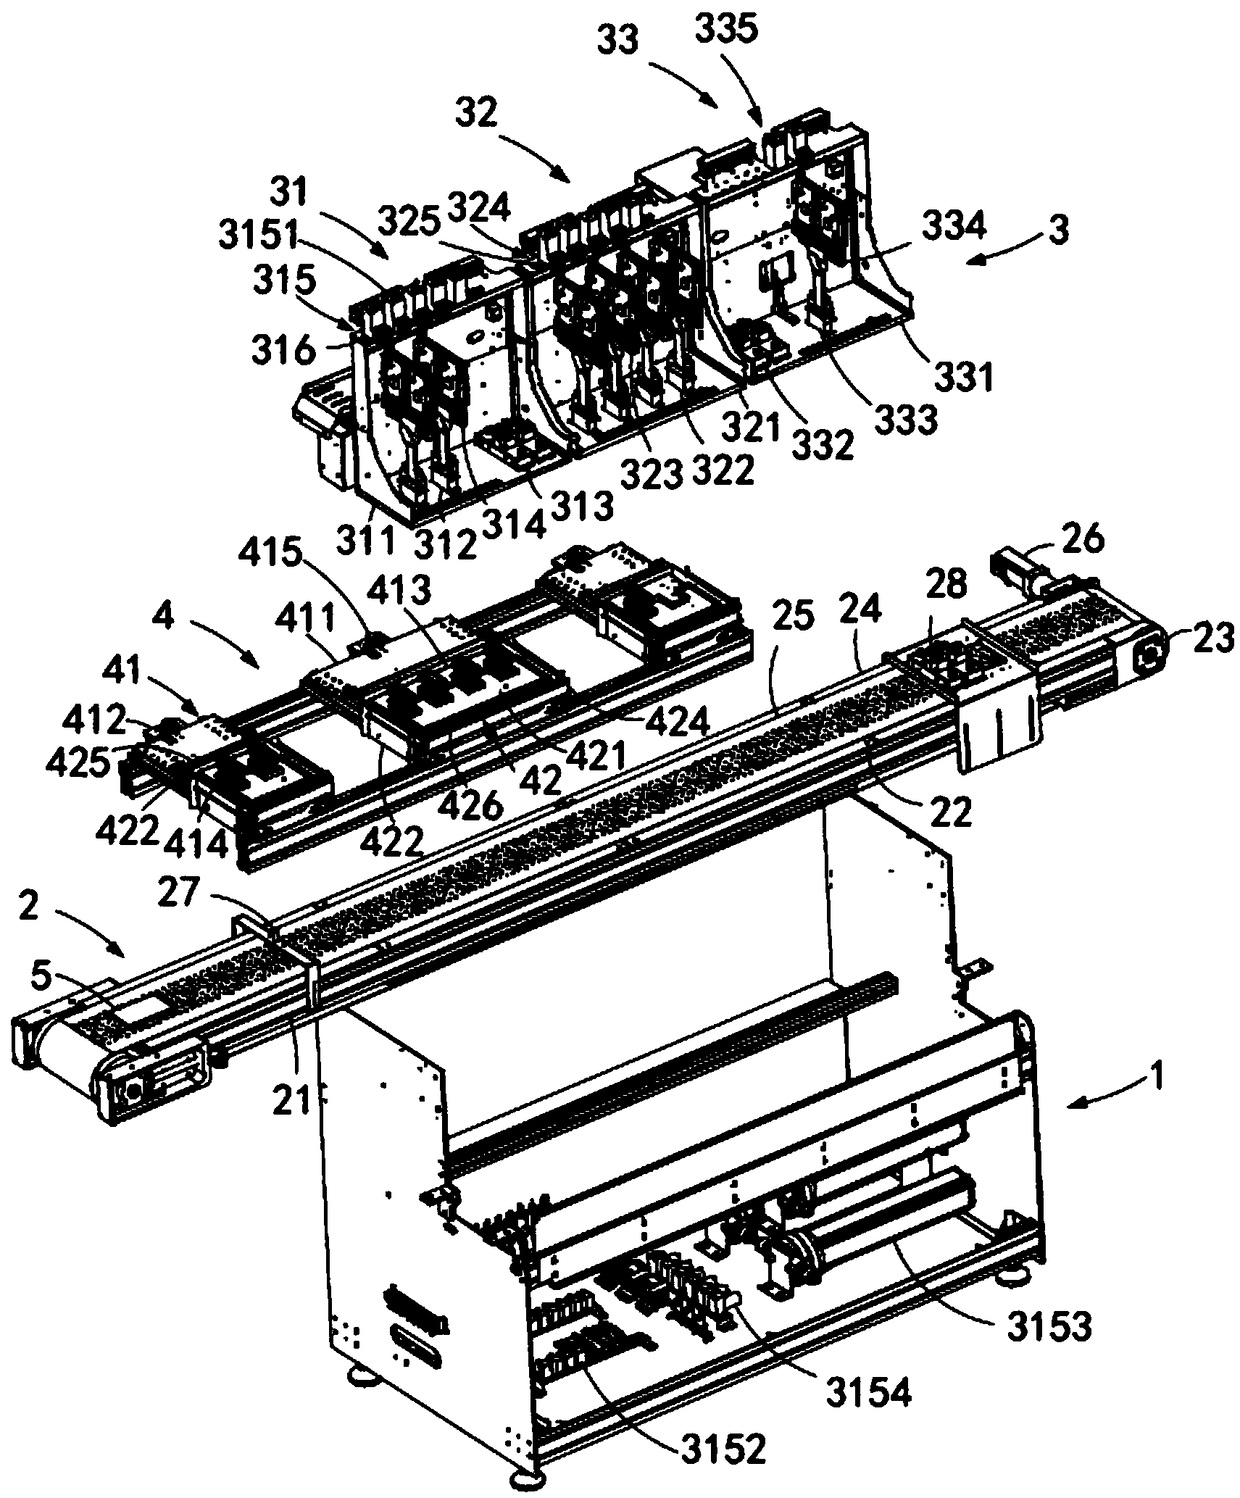 One-time imaging flatbed printer